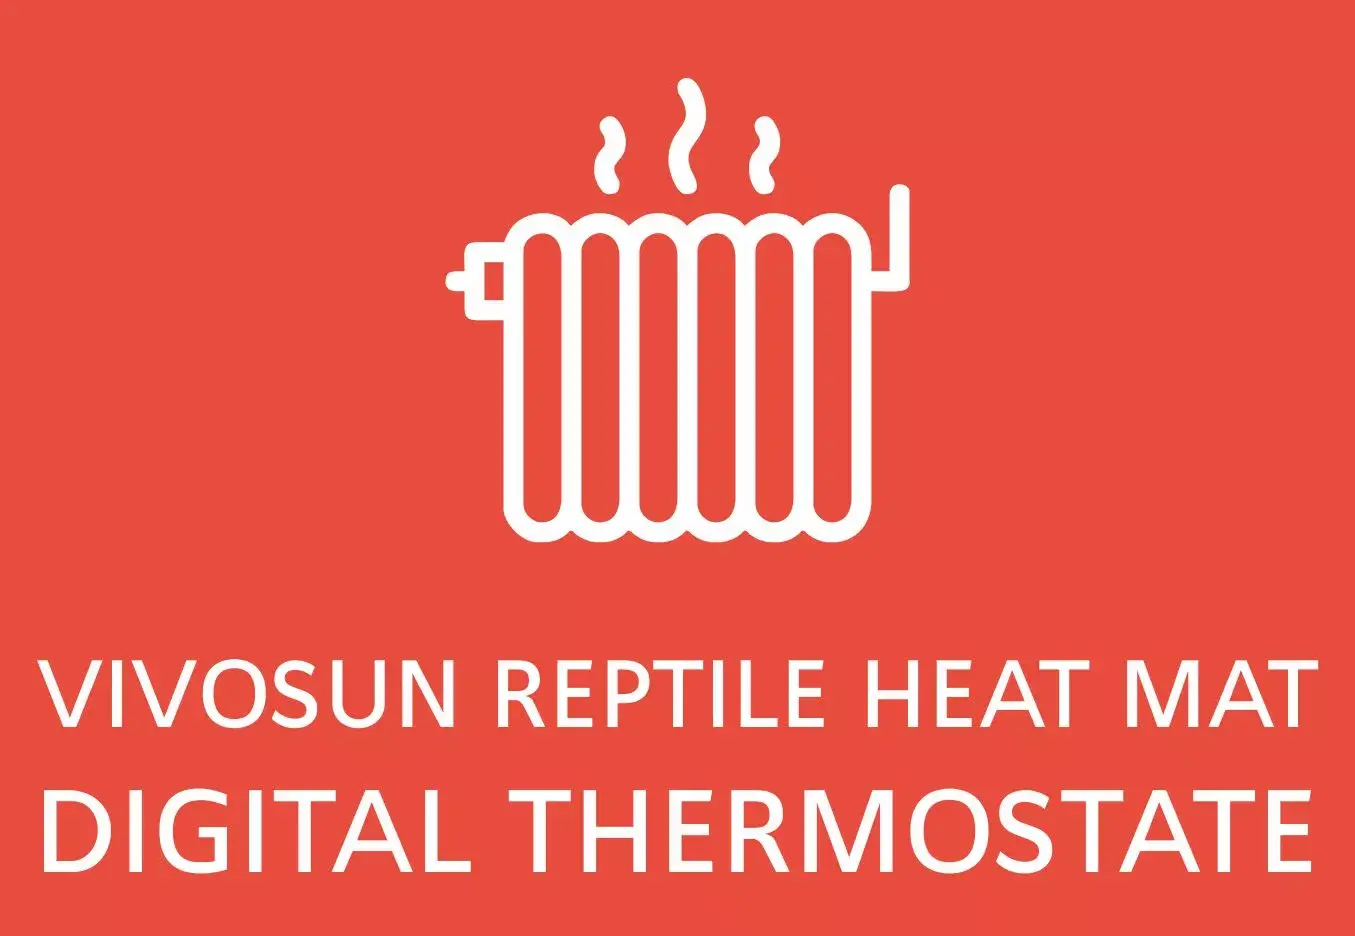 All about the VIVOSUN Reptile Heat Mat and Digital Thermostat Combo